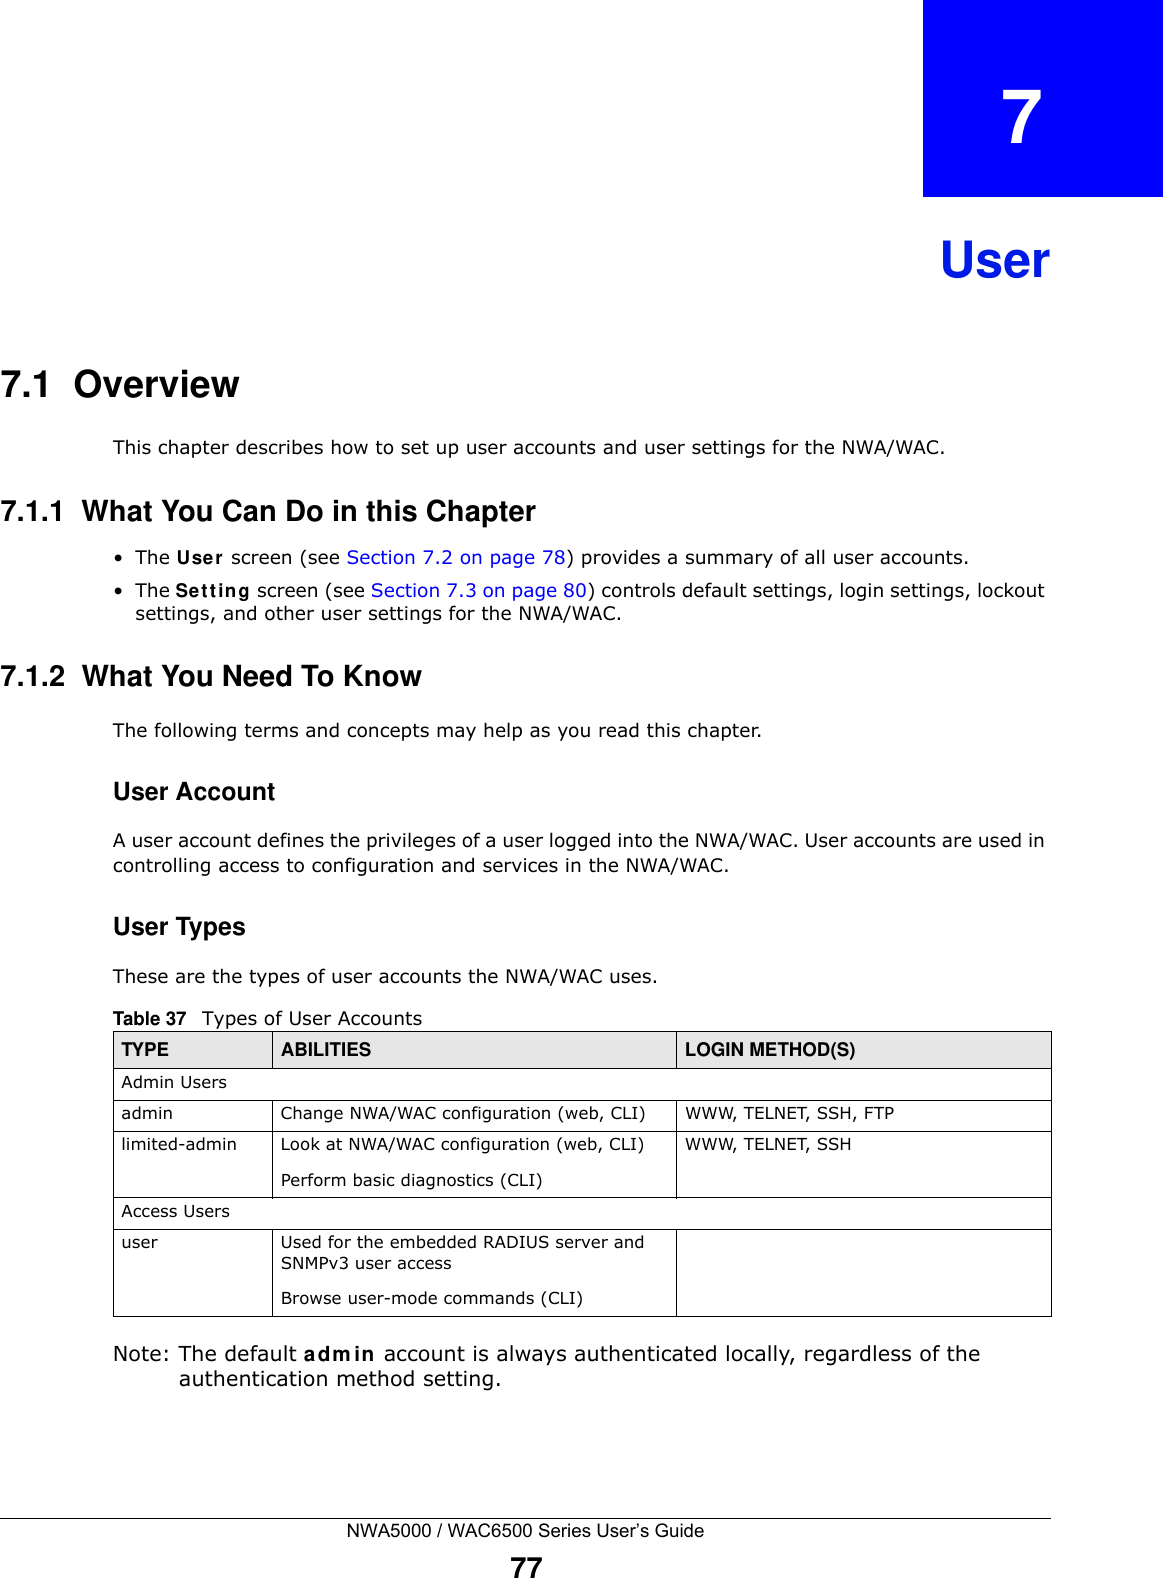 NWA5000 / WAC6500 Series User’s Guide77CHAPTER   7User7.1  OverviewThis chapter describes how to set up user accounts and user settings for the NWA/WAC. 7.1.1  What You Can Do in this Chapter•The Use r screen (see Section 7.2 on page 78) provides a summary of all user accounts.•The Se tt ing screen (see Section 7.3 on page 80) controls default settings, login settings, lockout settings, and other user settings for the NWA/WAC. 7.1.2  What You Need To KnowThe following terms and concepts may help as you read this chapter.User AccountA user account defines the privileges of a user logged into the NWA/WAC. User accounts are used in controlling access to configuration and services in the NWA/WAC.User TypesThese are the types of user accounts the NWA/WAC uses.  Note: The default adm in account is always authenticated locally, regardless of the authentication method setting.Table 37   Types of User AccountsTYPE ABILITIES LOGIN METHOD(S)Admin Usersadmin Change NWA/WAC configuration (web, CLI) WWW, TELNET, SSH, FTPlimited-admin Look at NWA/WAC configuration (web, CLI)Perform basic diagnostics (CLI)WWW, TELNET, SSHAccess Usersuser Used for the embedded RADIUS server and SNMPv3 user accessBrowse user-mode commands (CLI)